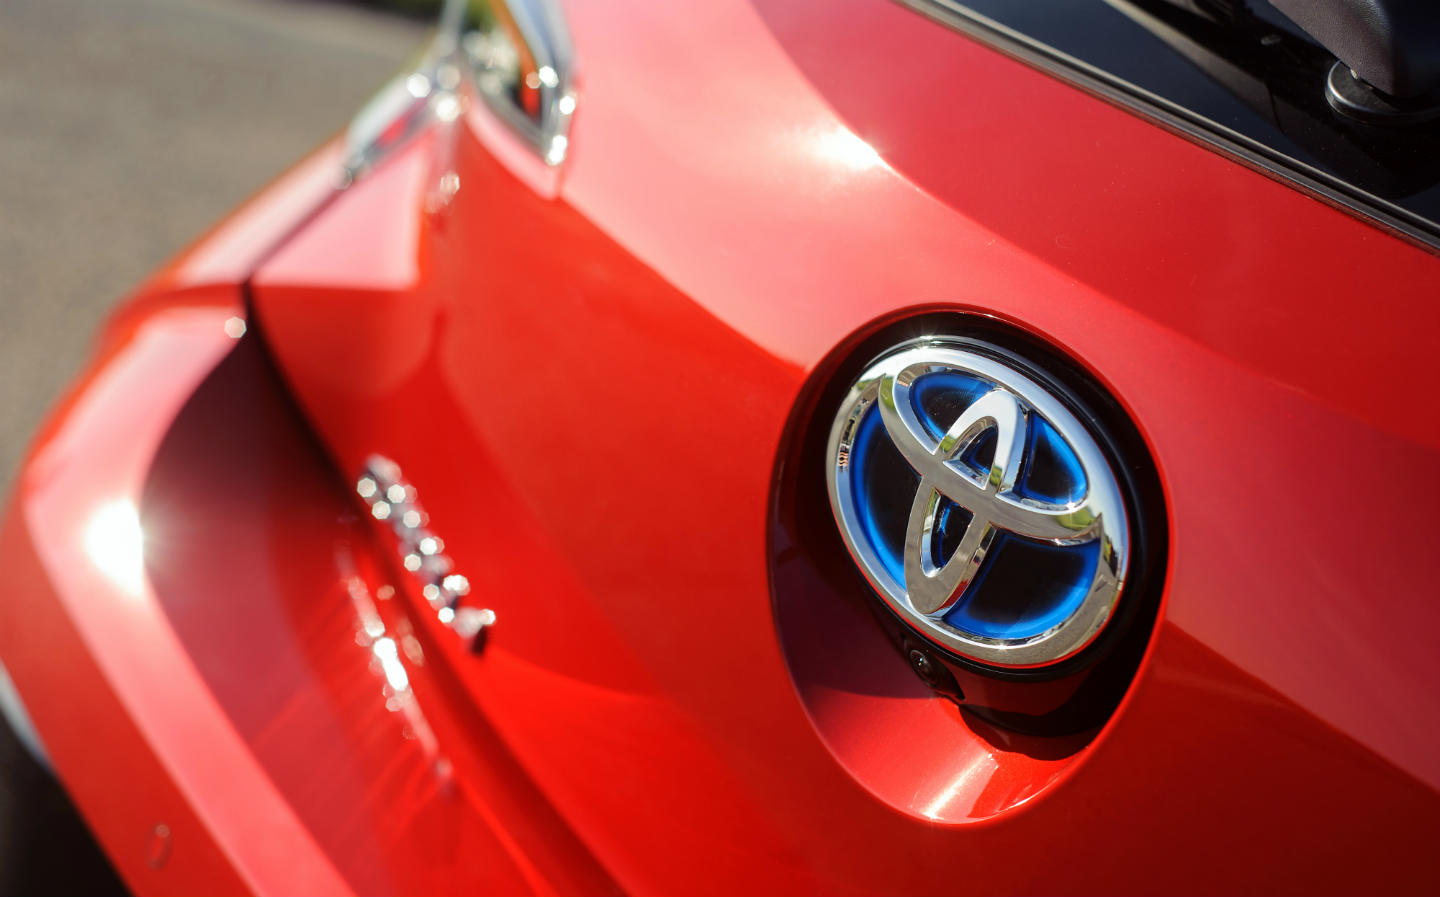 Toyota will let you use its hybrid tech royalty-free